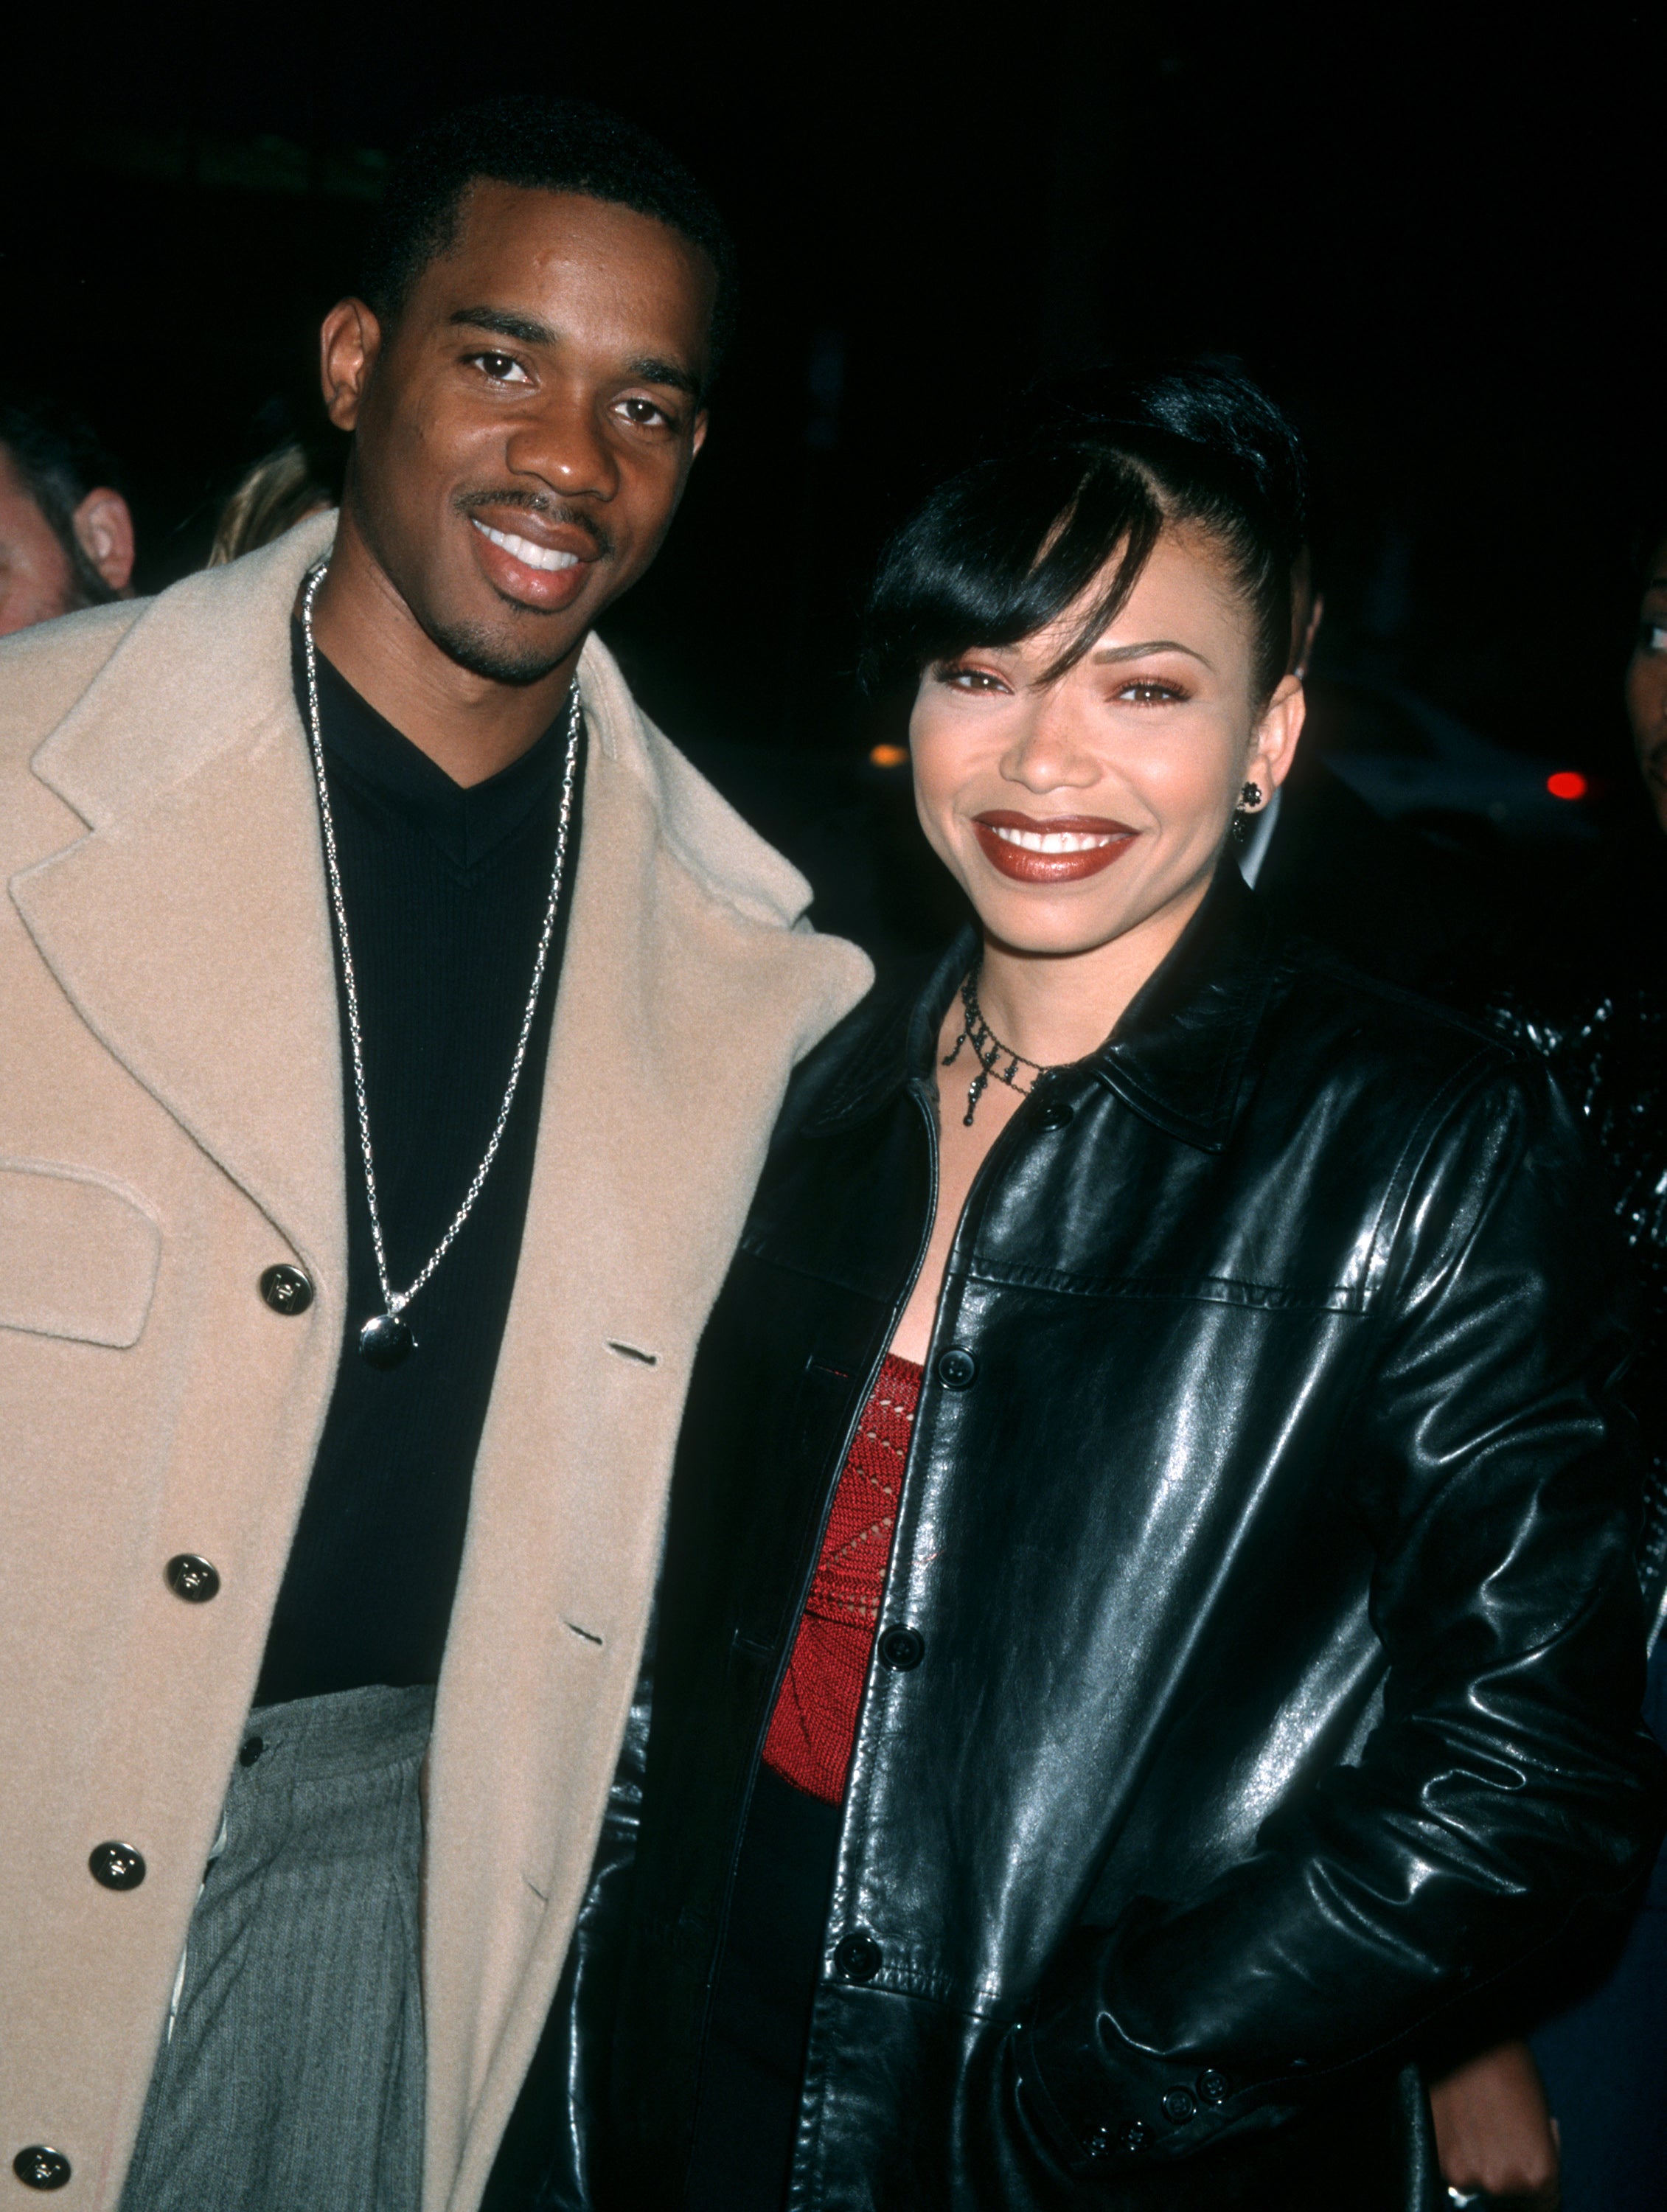 Tisha Campbell and Duane Martin Show Us What Being Happily Married for 20 Years Looks Like